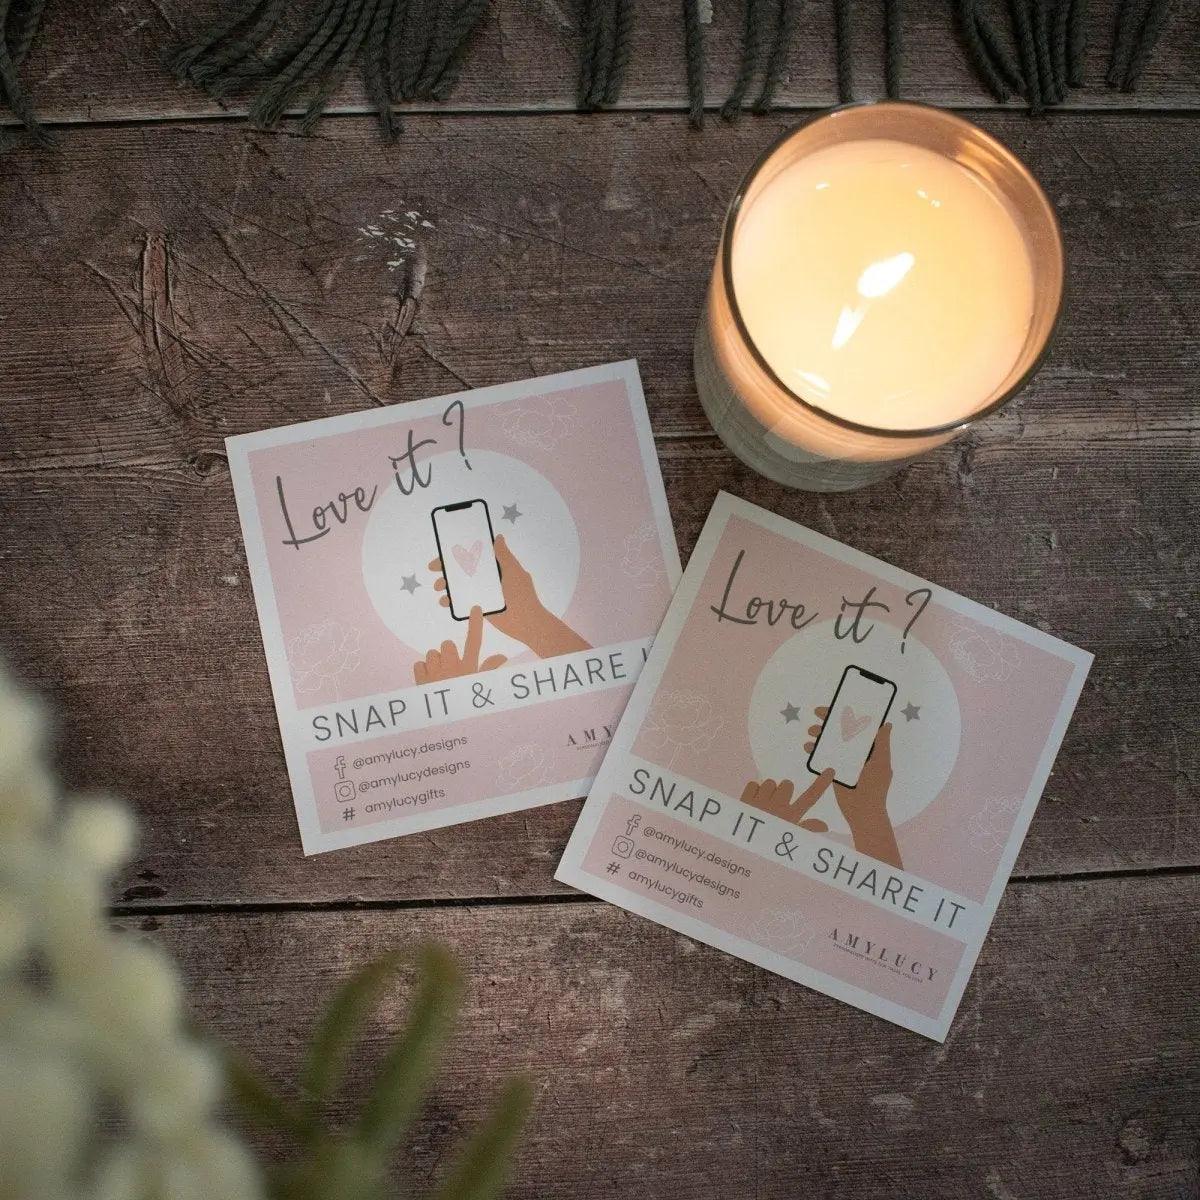 Personalised Anniversary Candle, Anniversary Gift, Rose Gold Candle, Love Couple Gift, Wedding Anniversary Candle, Custom Names, Anniversary - Amy Lucy